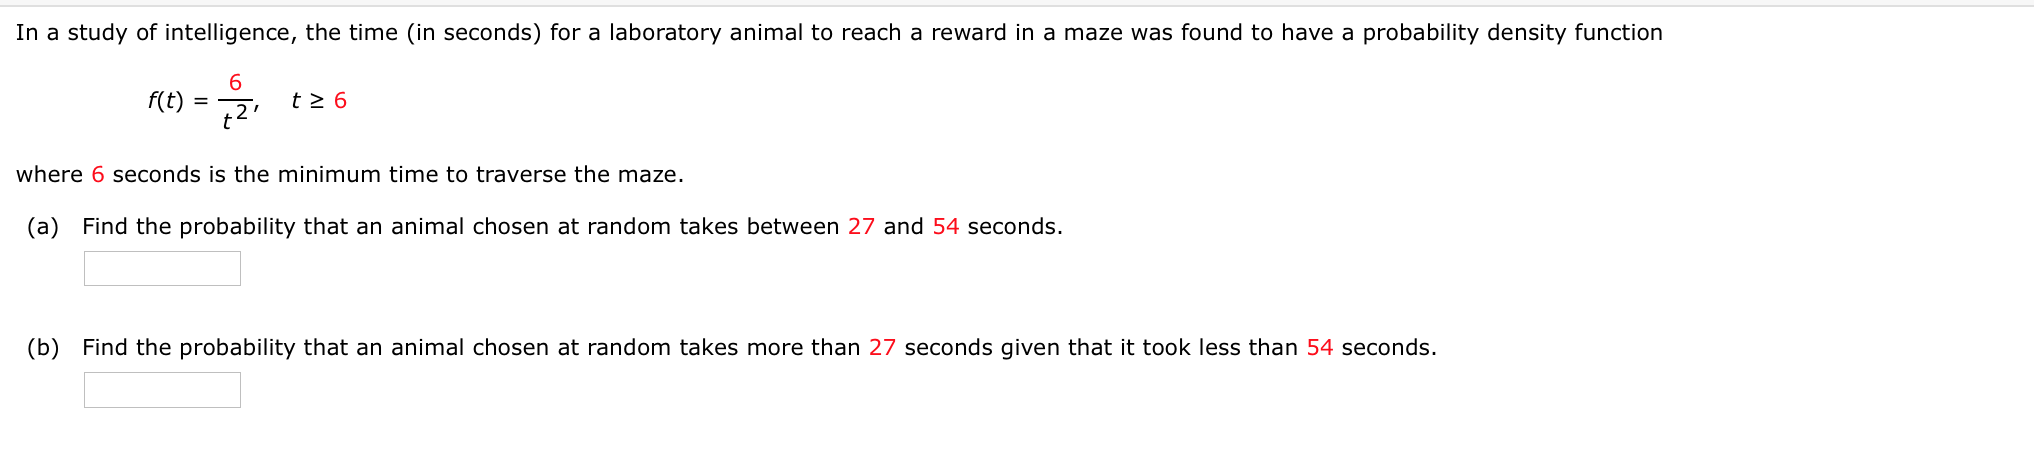 In a study of intelligence, the time (in seconds) for a laboratory animal to reach a reward in a maze was found to have a probability density function
2 t26
f(t)
where 6 seconds is the minimum time to traverse the maze.
(a) Find the probability that an animal chosen at random takes between 27 and 54 seconds.
